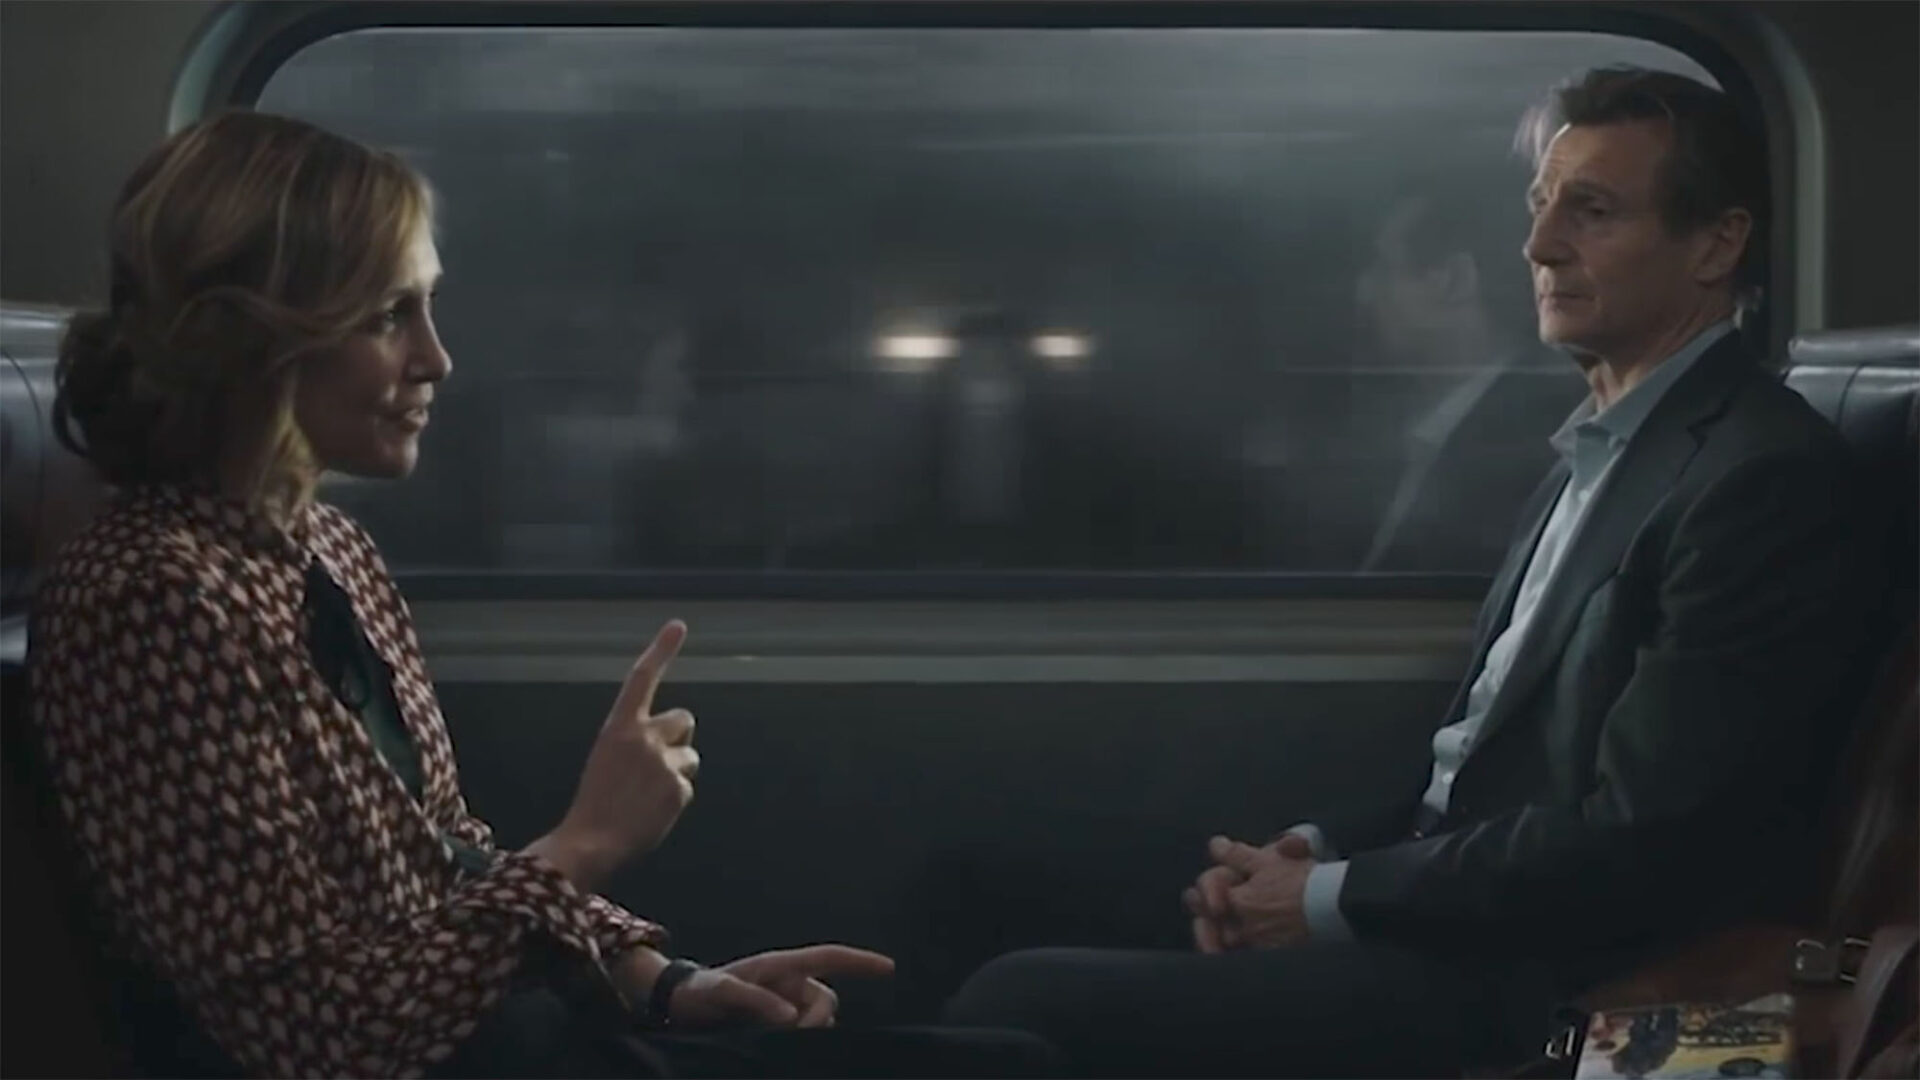 ‘The Commuter’ is a movie that your dad will probably quite enjoy